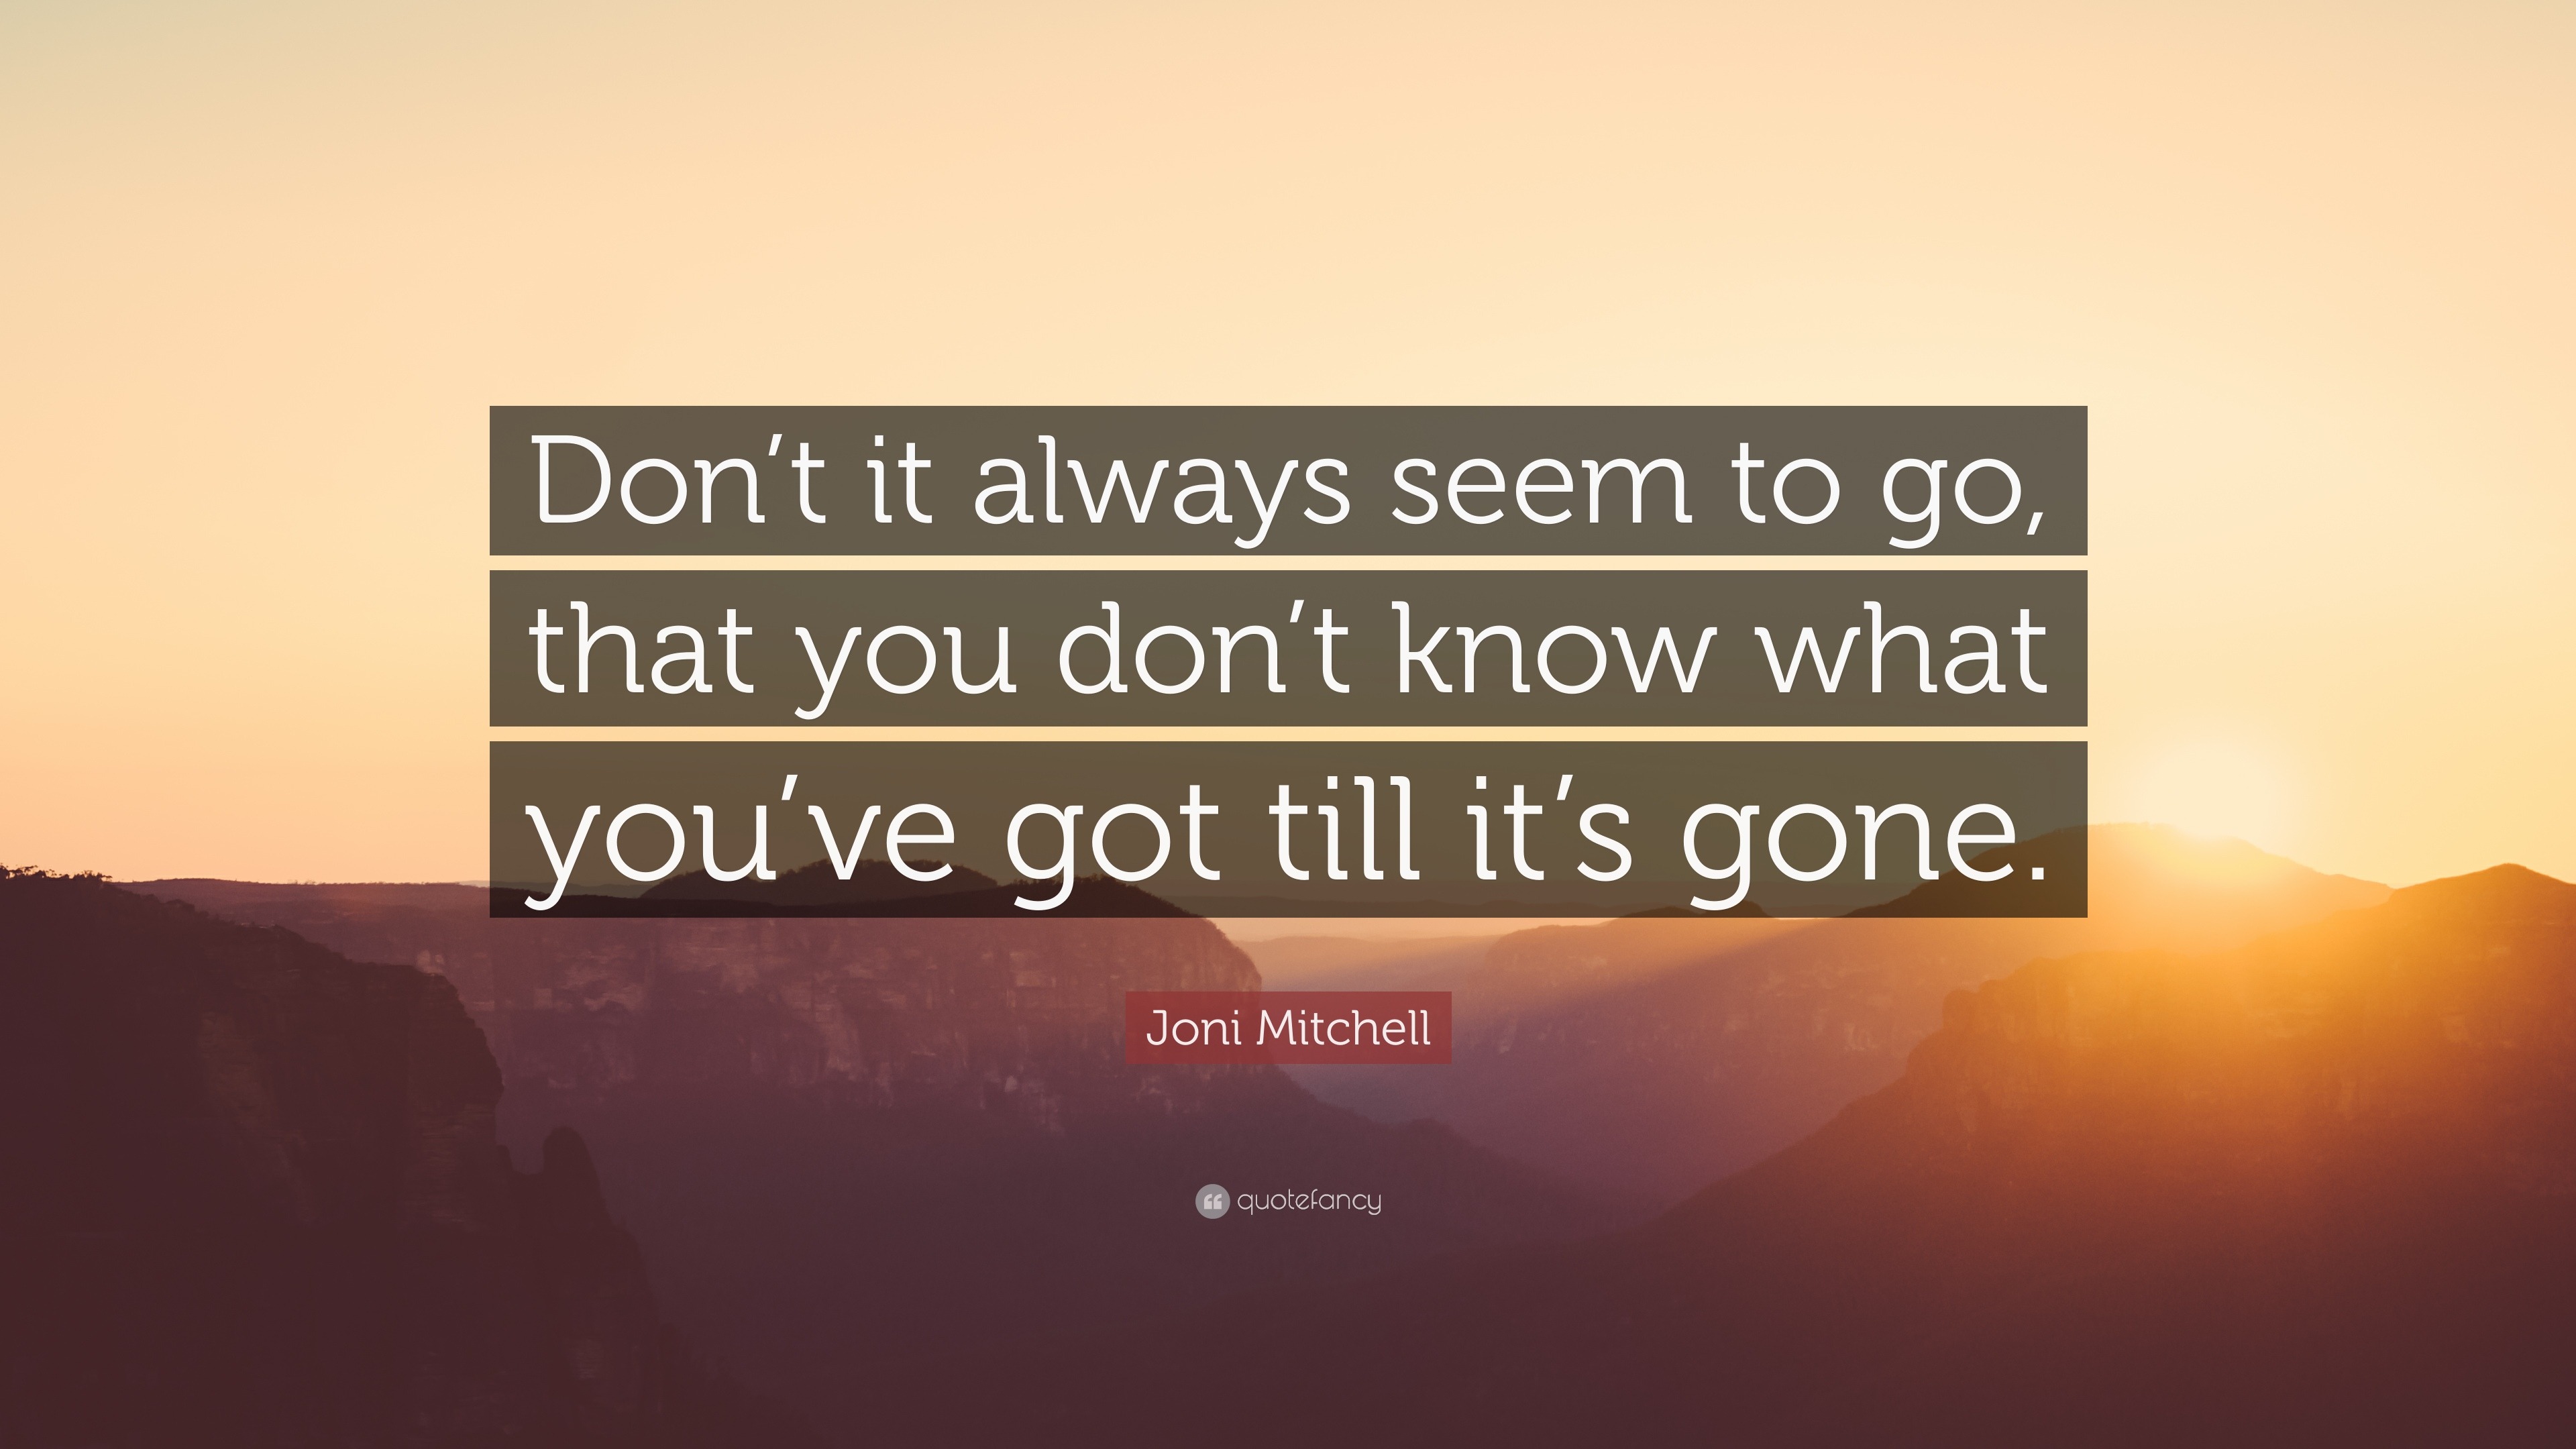 375060-Joni-Mitchell-Quote-Don-t-it-always-seem-to-go-that-you-don-t-know.jpg